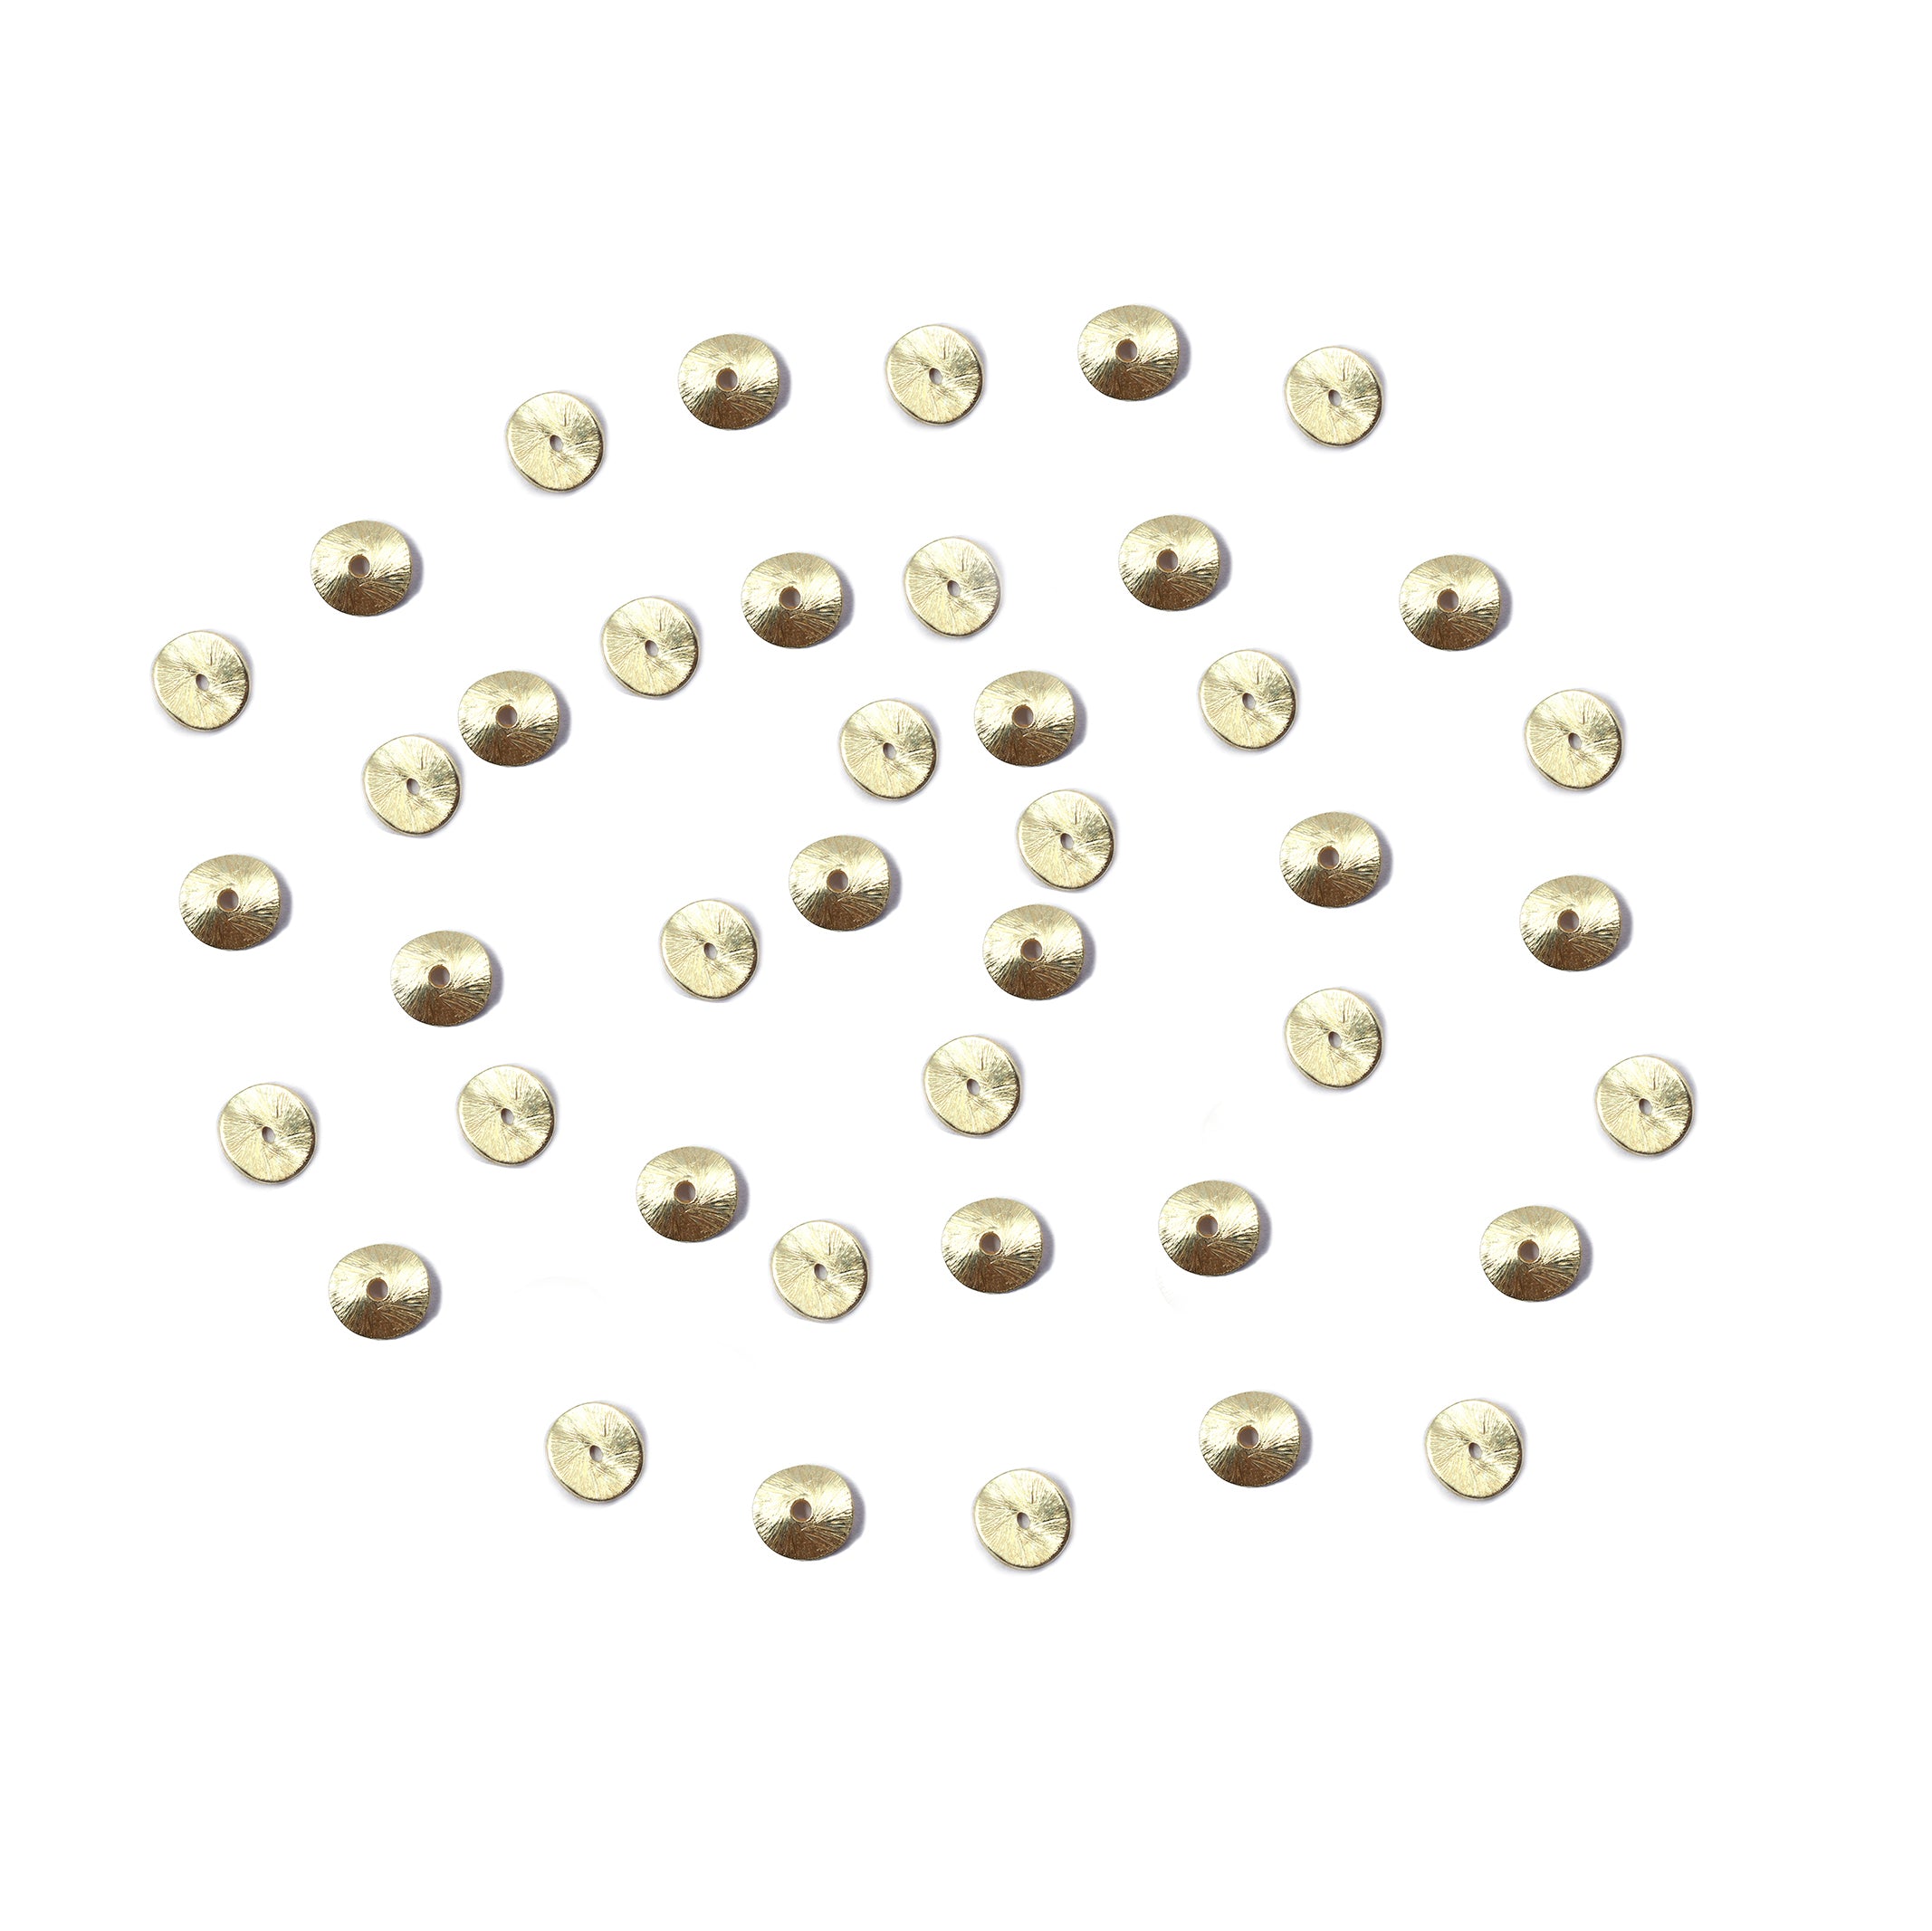 65 Pcs 8mm Wavy Disc Brushed Matte Finish Beads Gold Plated Copper